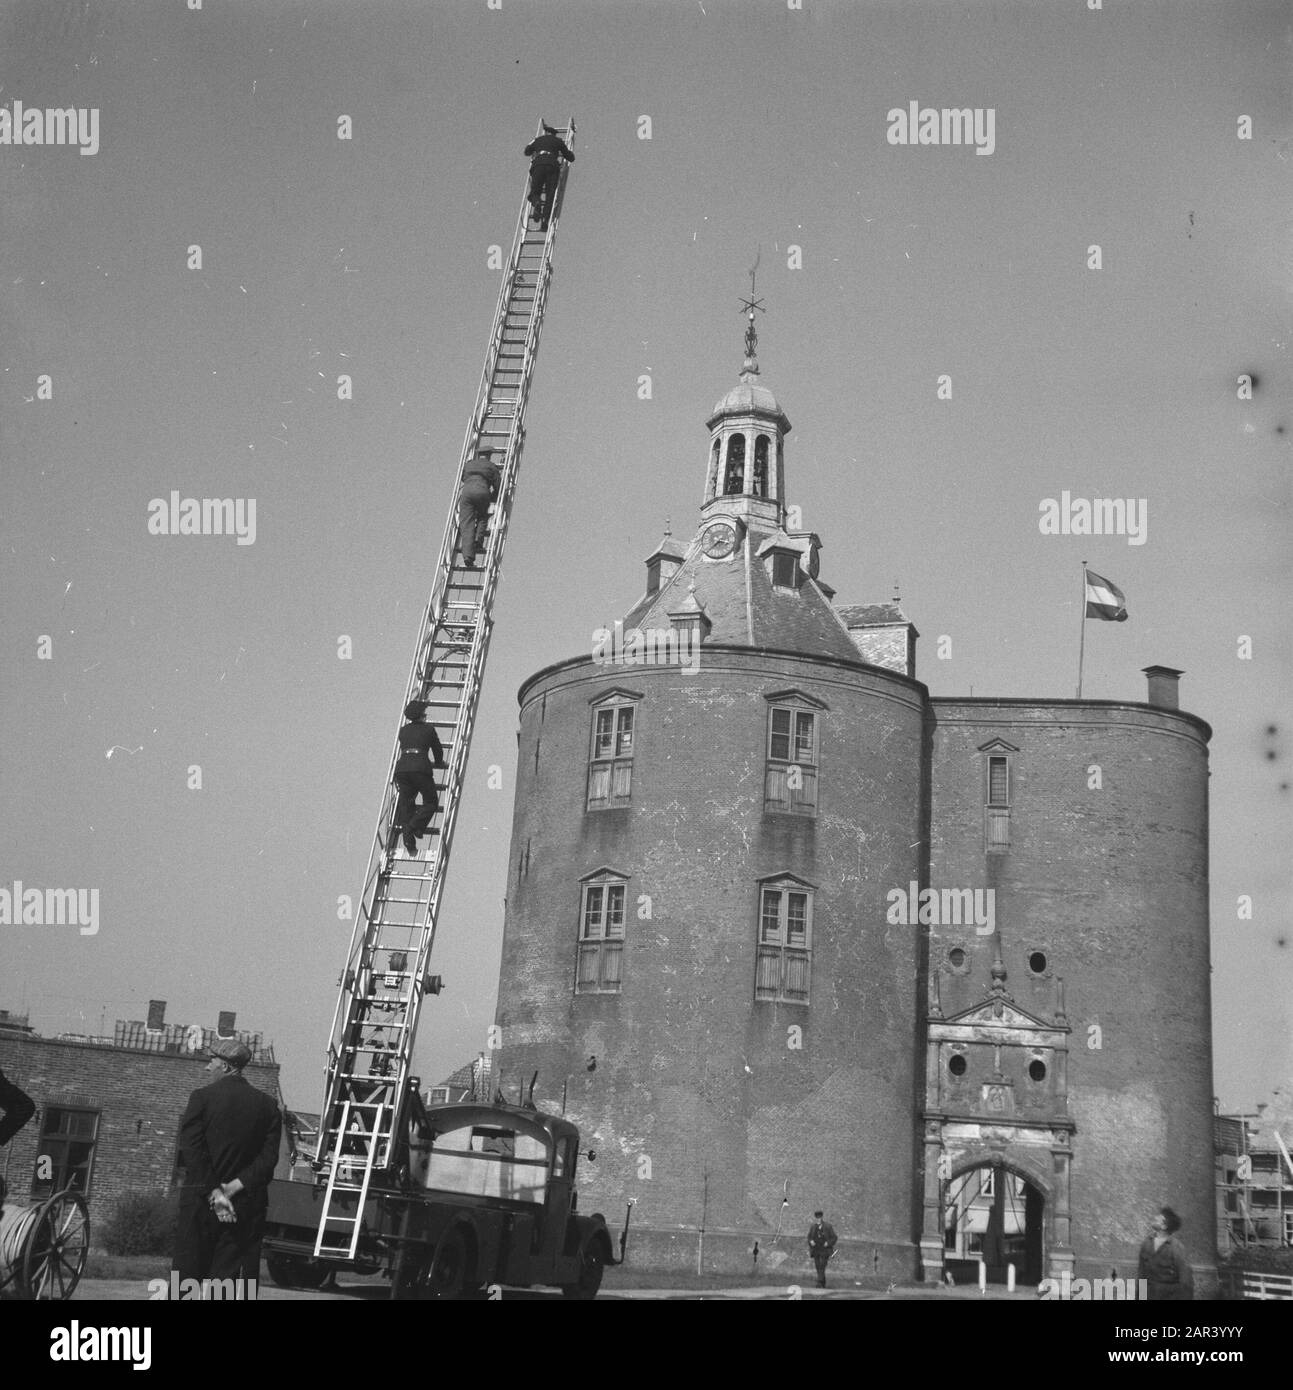 Jubilee at fire brigade Enkhuizen. Demonstrations of several fire brigades on site in front of the Dromedaris at the port. Date: 17 April 1946 Location: Enkhuizen Keywords: fire brigade, anniversaries Stock Photo